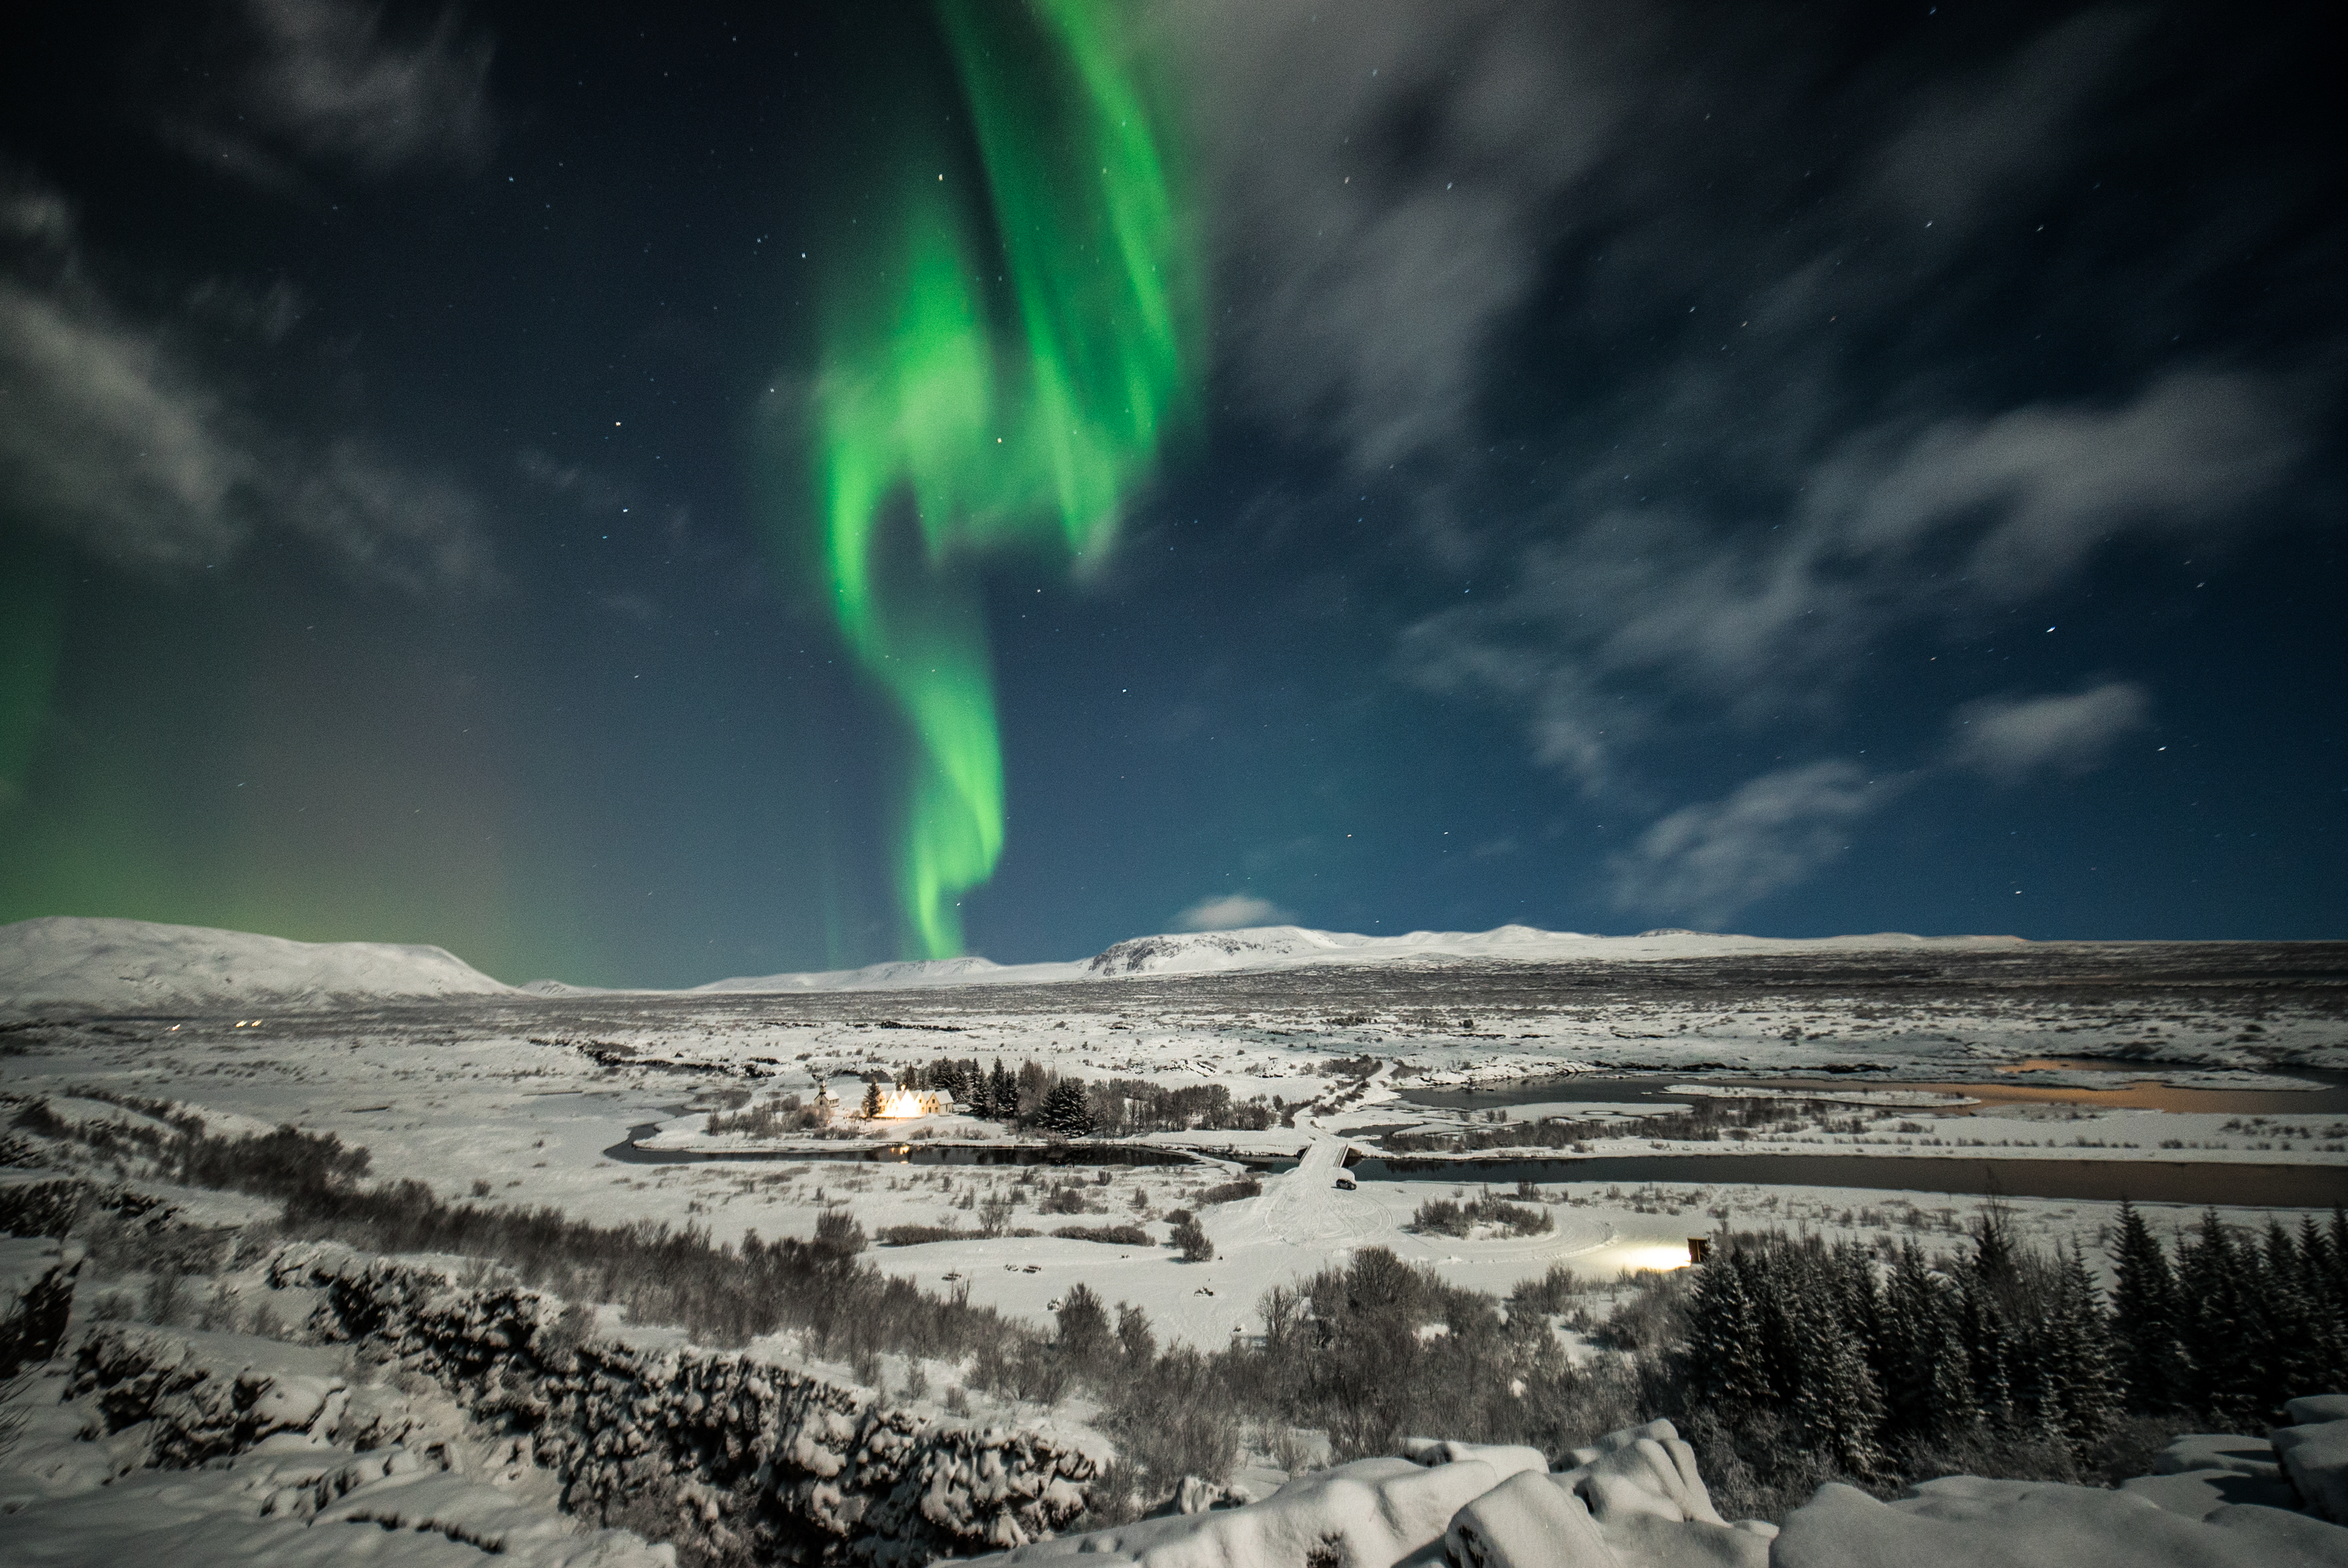 The beautiful Northern Lights moving like dancers in the sky above Þingvellir National Park.